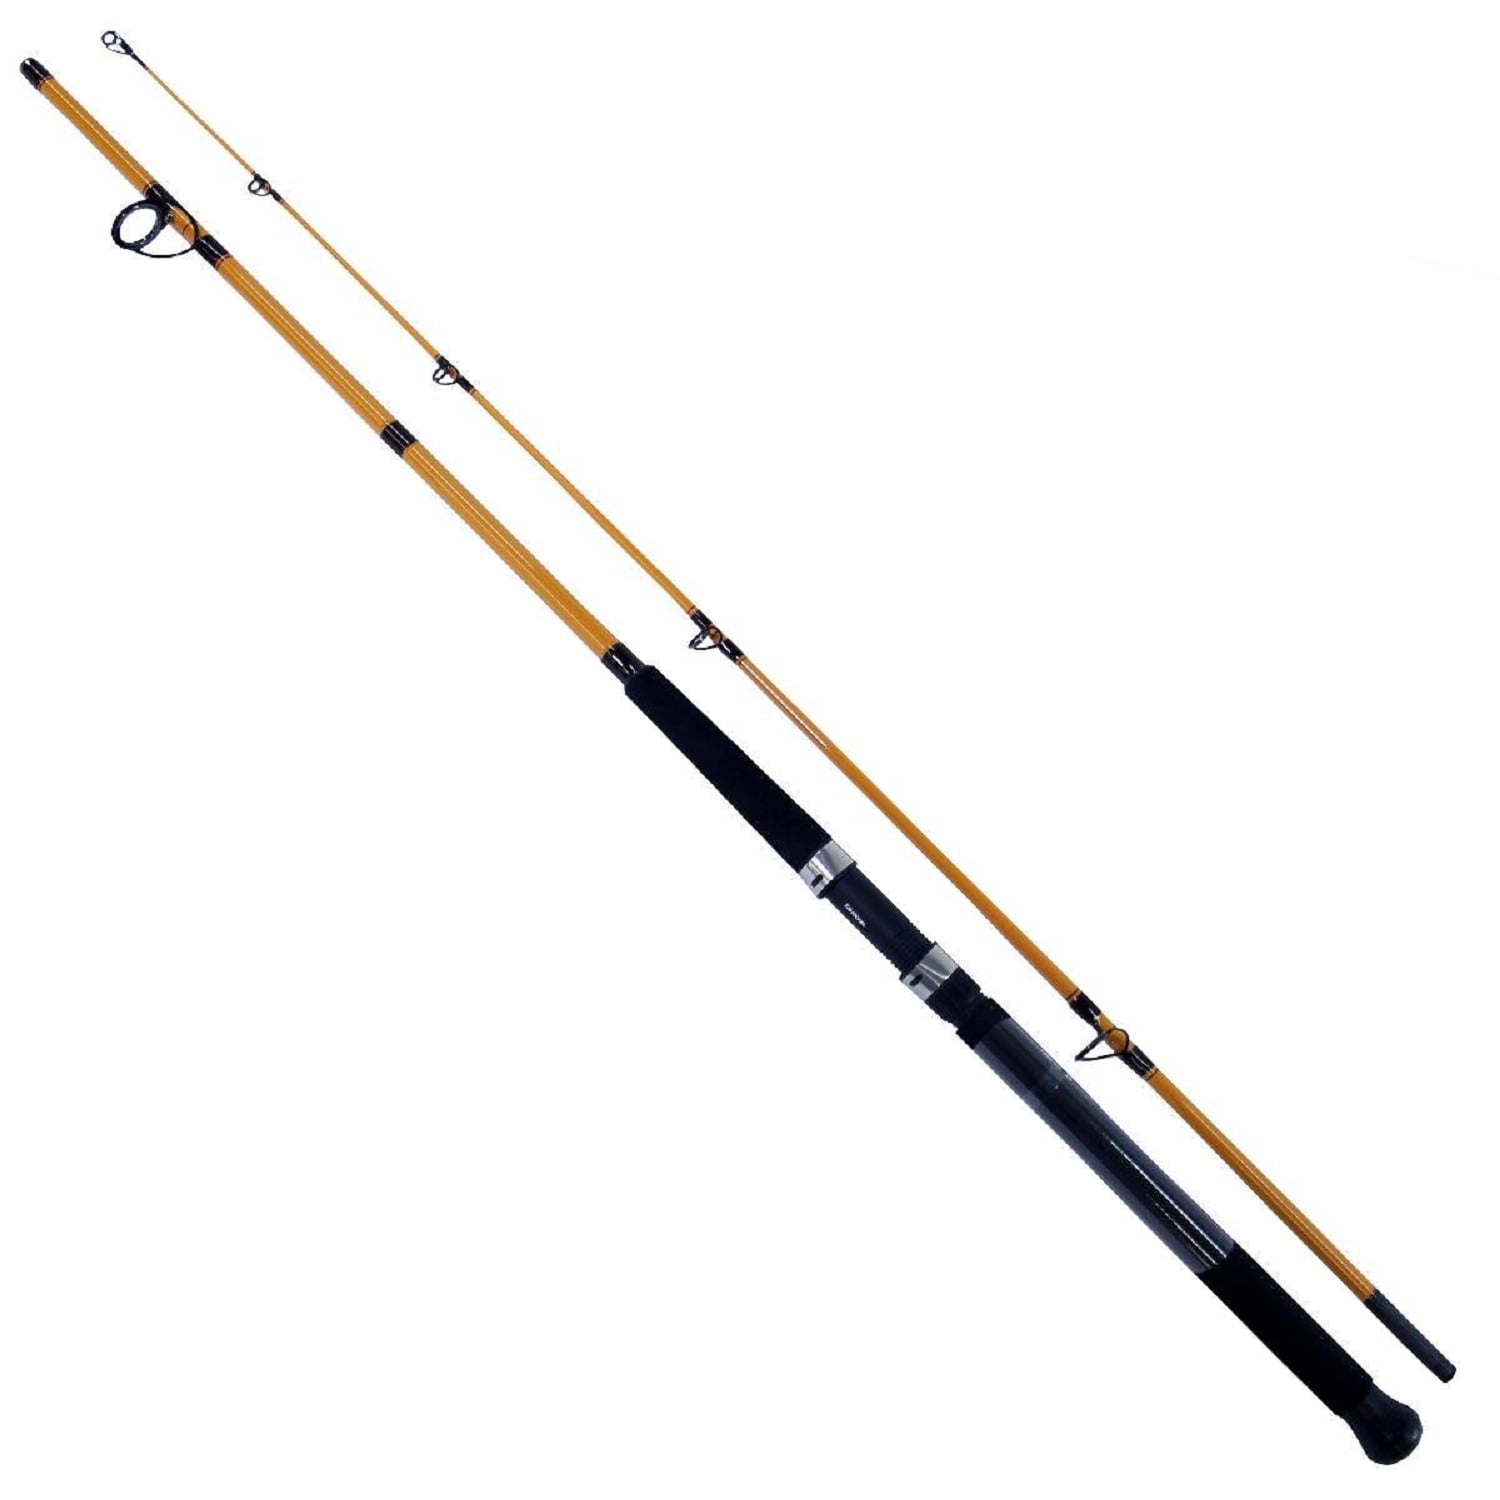 B & M ST4 14 Ft Black Widow Pole With Guides And Handle 100% Fiberglass 13949 